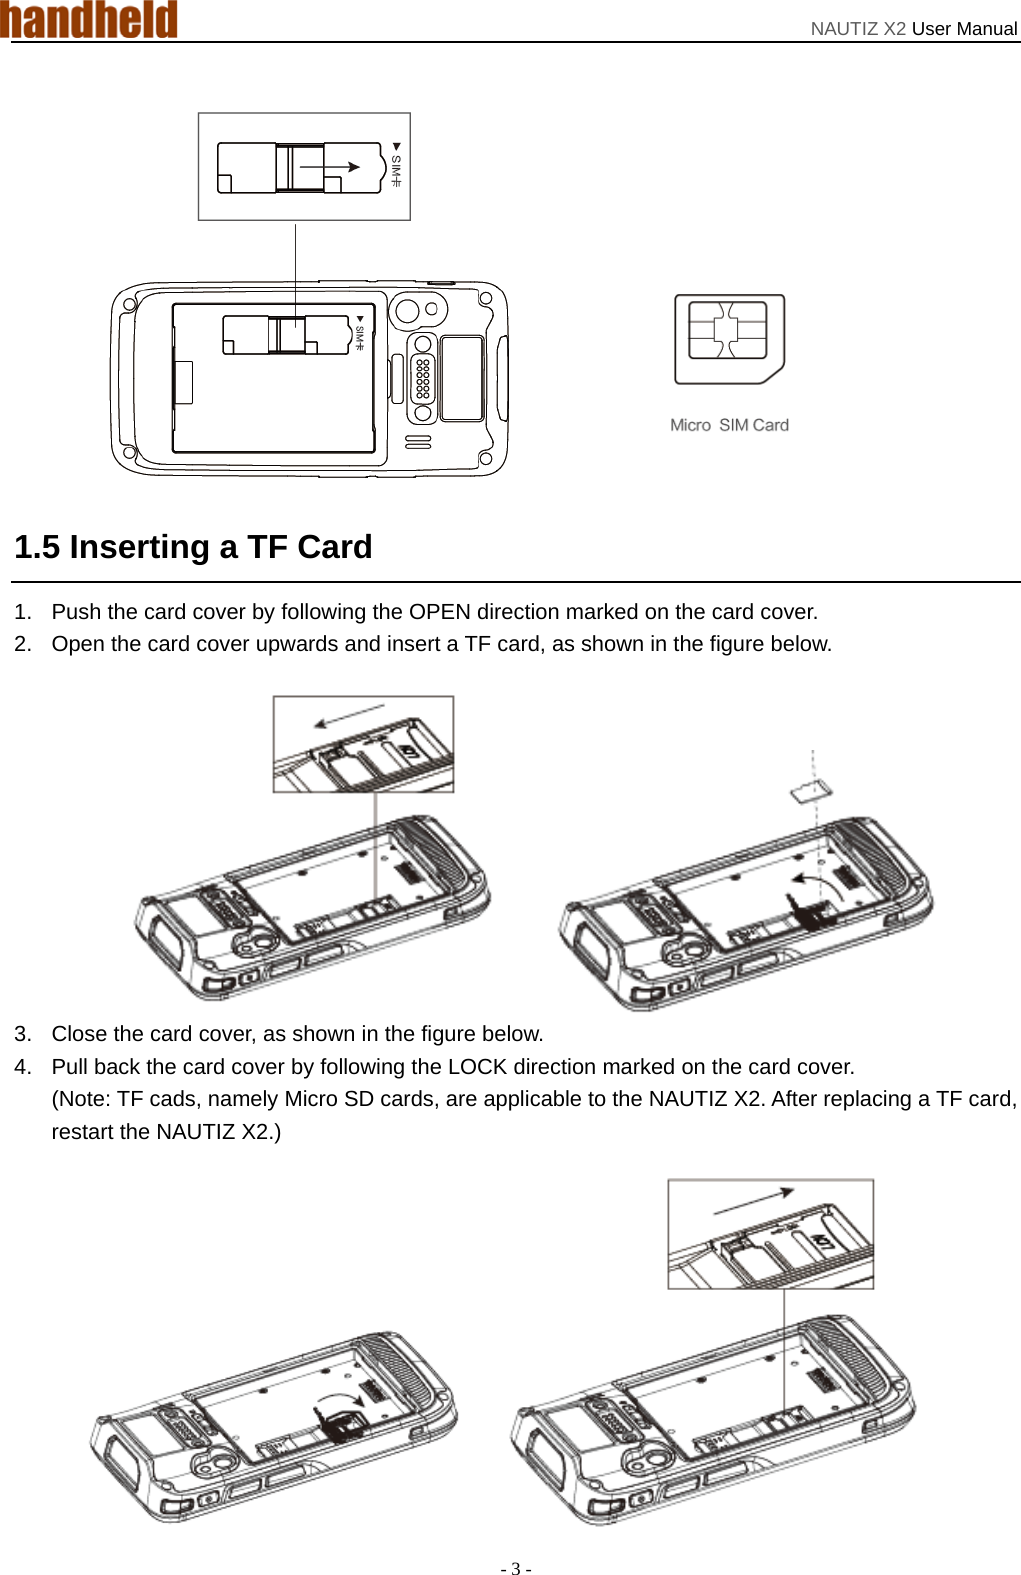 NAUTIZ X2 User Manual - 3 -  1.5 Inserting a TF Card 1.  Push the card cover by following the OPEN direction marked on the card cover.   2.  Open the card cover upwards and insert a TF card, as shown in the figure below.   3.  Close the card cover, as shown in the figure below. 4.  Pull back the card cover by following the LOCK direction marked on the card cover.   (Note: TF cads, namely Micro SD cards, are applicable to the NAUTIZ X2. After replacing a TF card, restart the NAUTIZ X2.)  